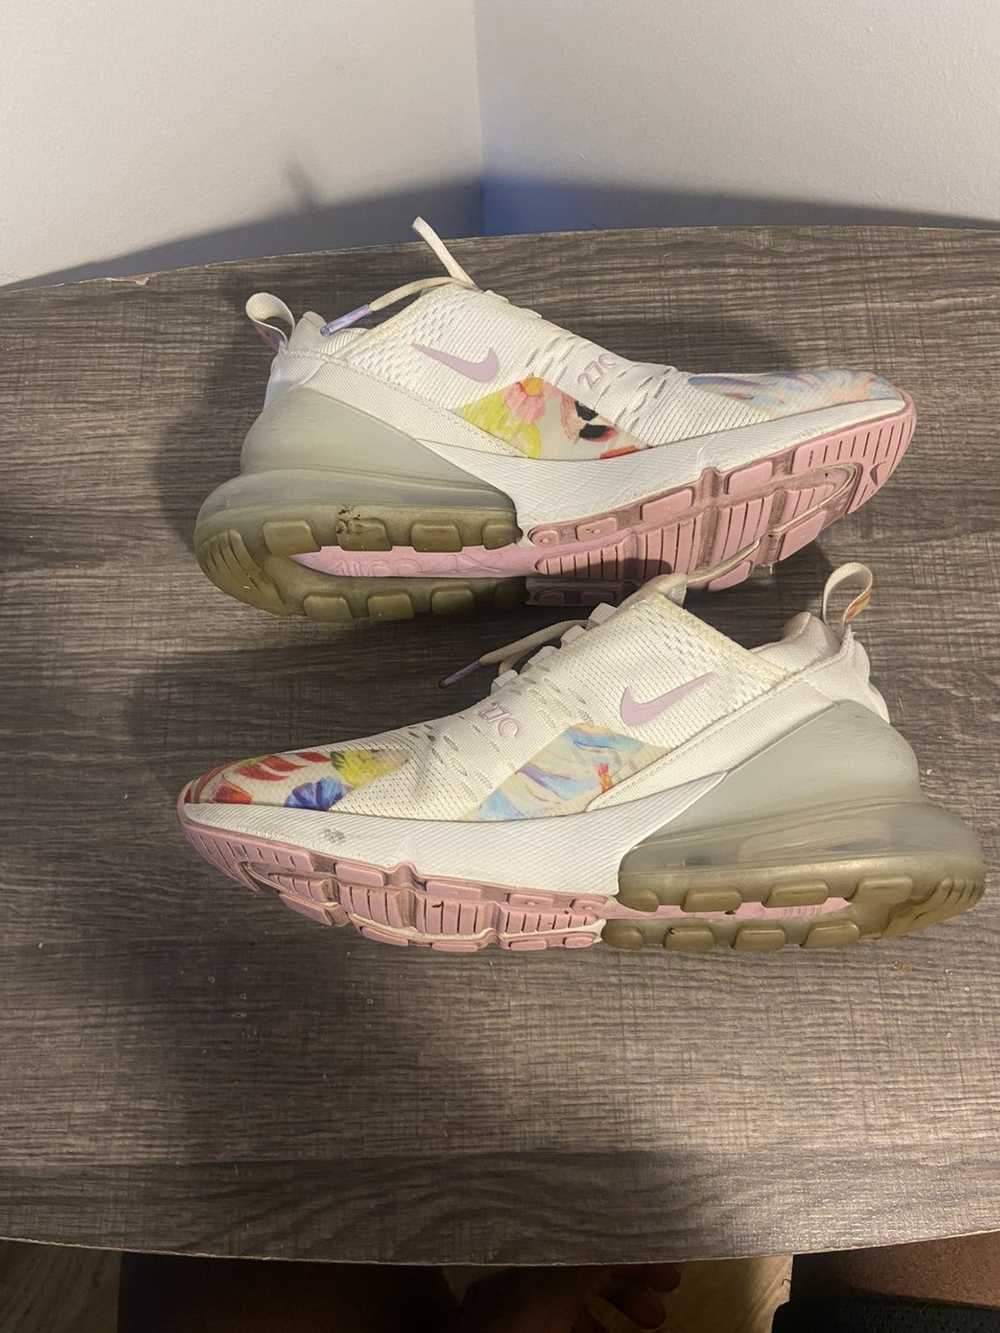 Nike Wmns Air Max 270 ‘Floral’ - image 3